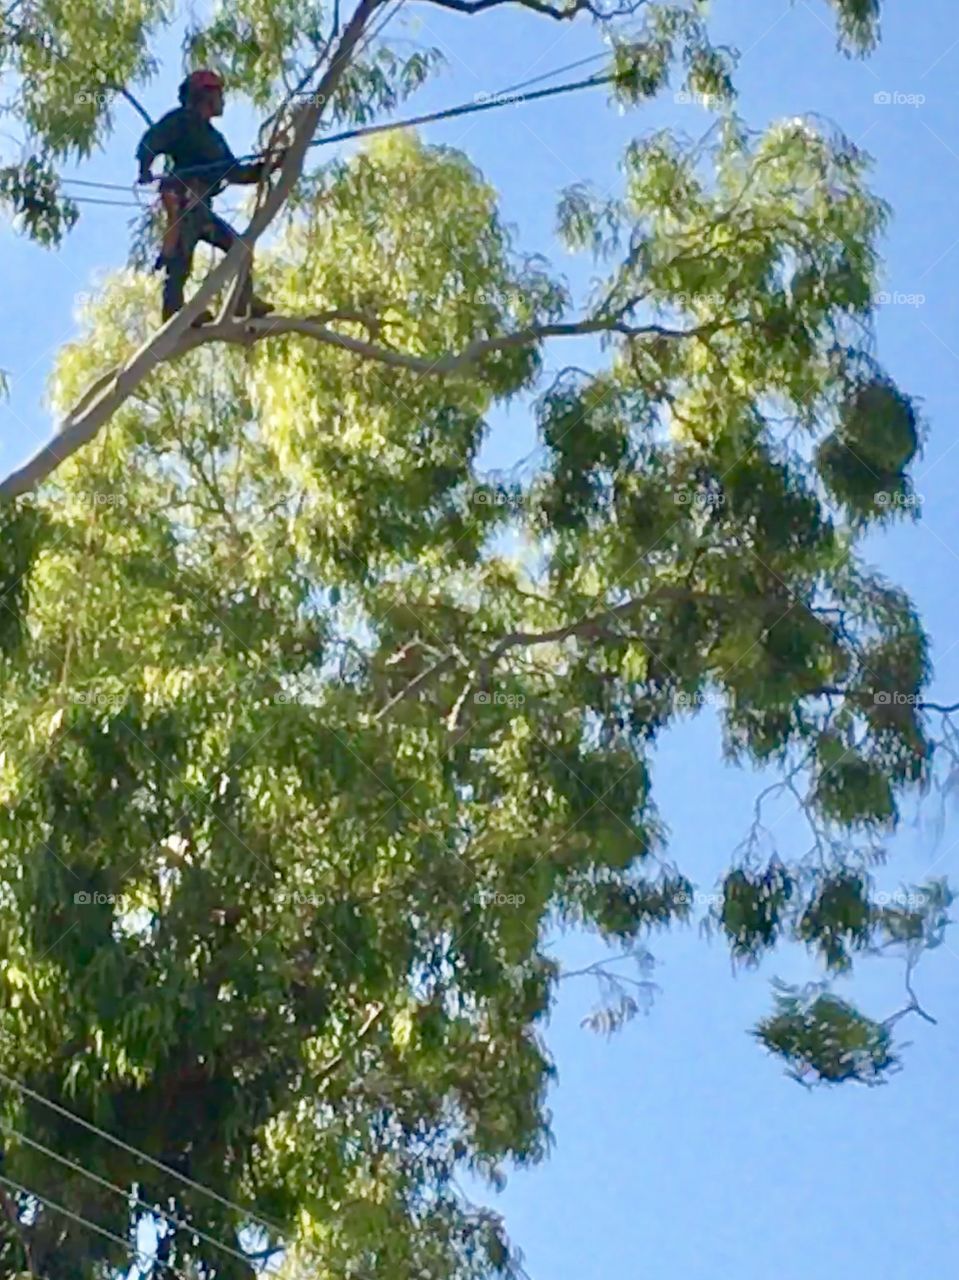 Be careful, tree trimmer 